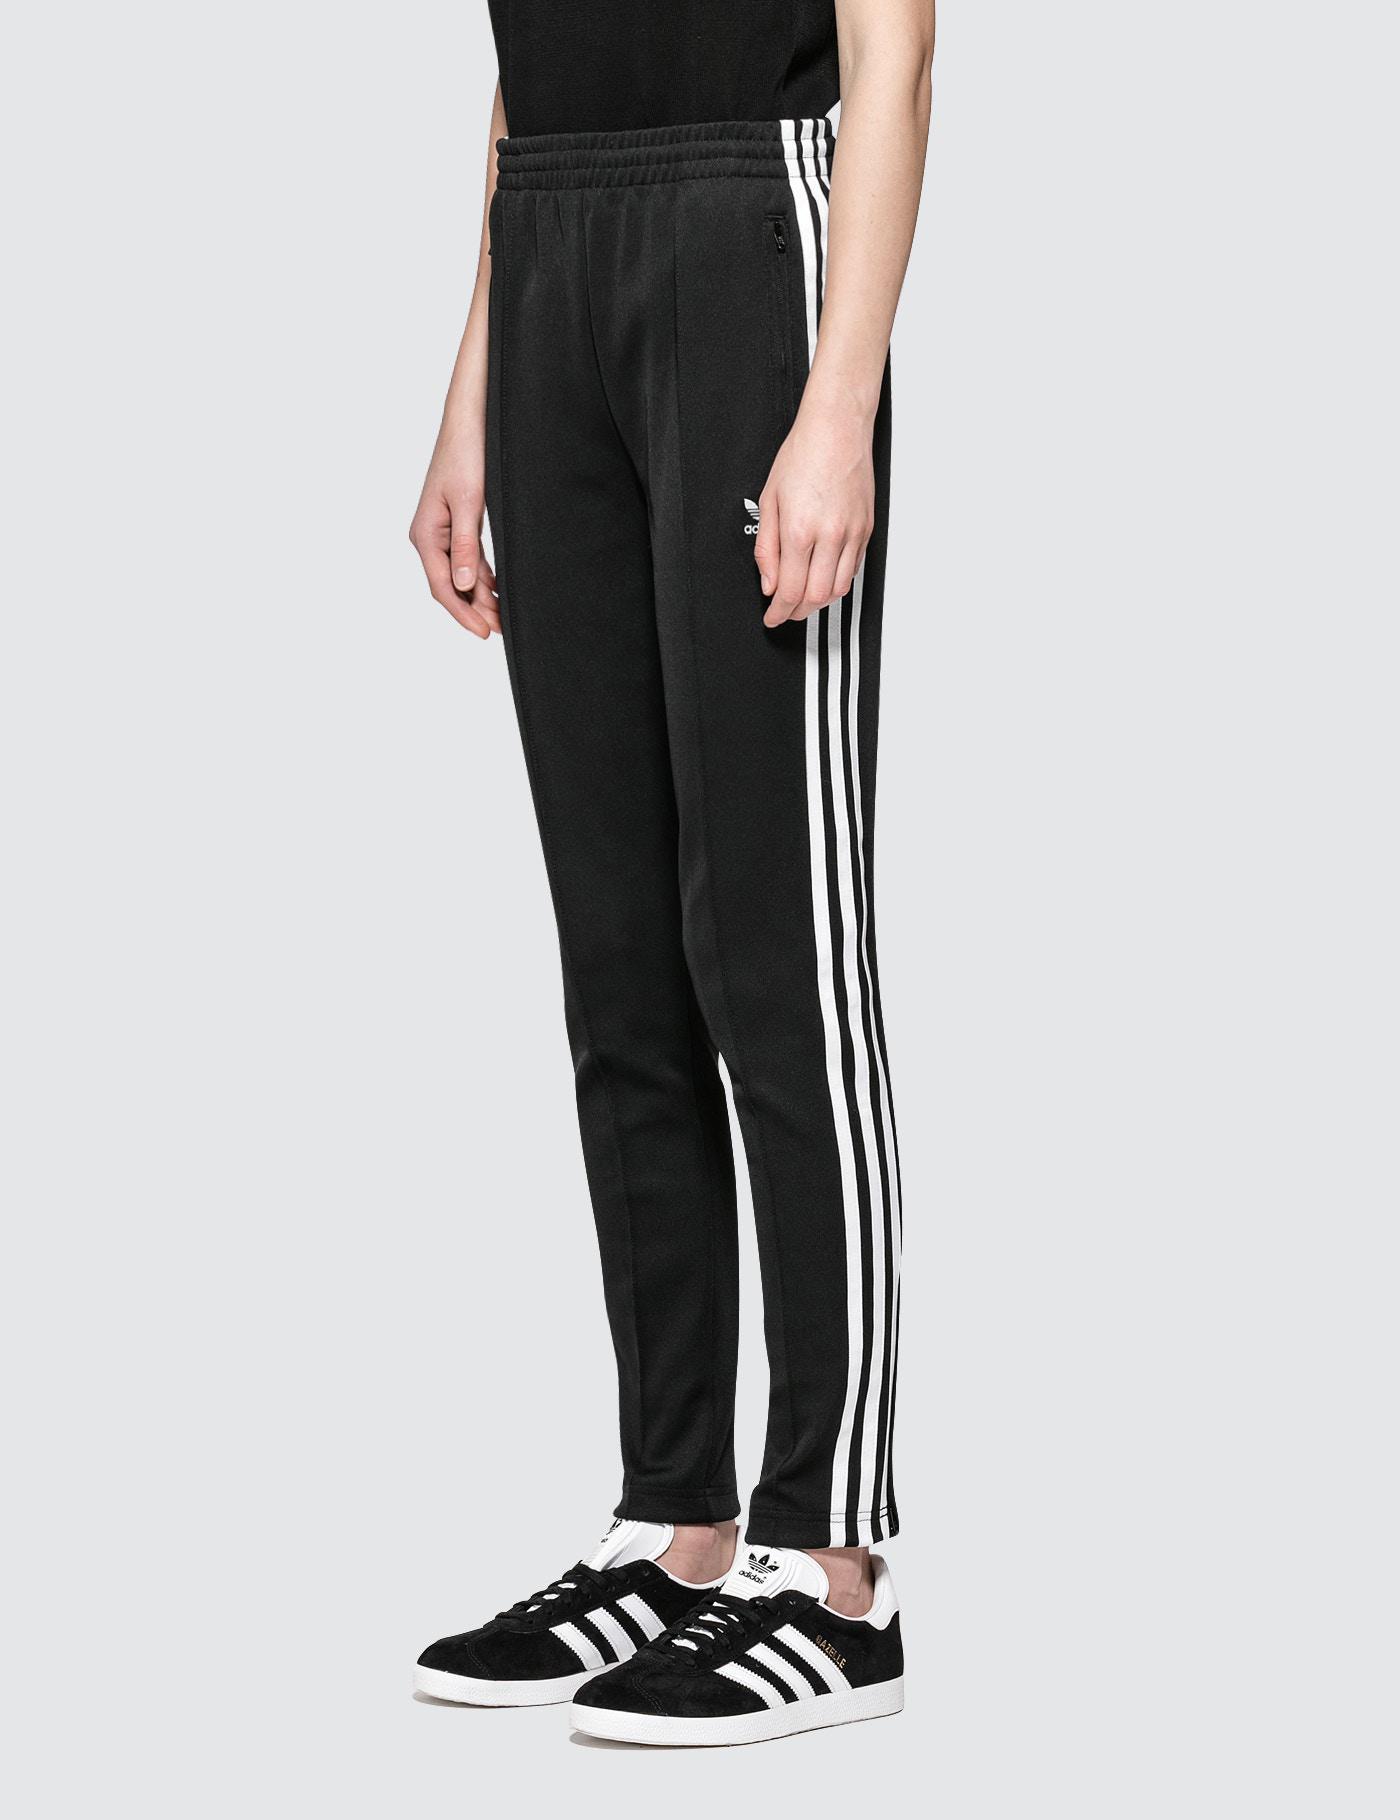 adidas Originals Synthetic Sst Tp in Black - Lyst